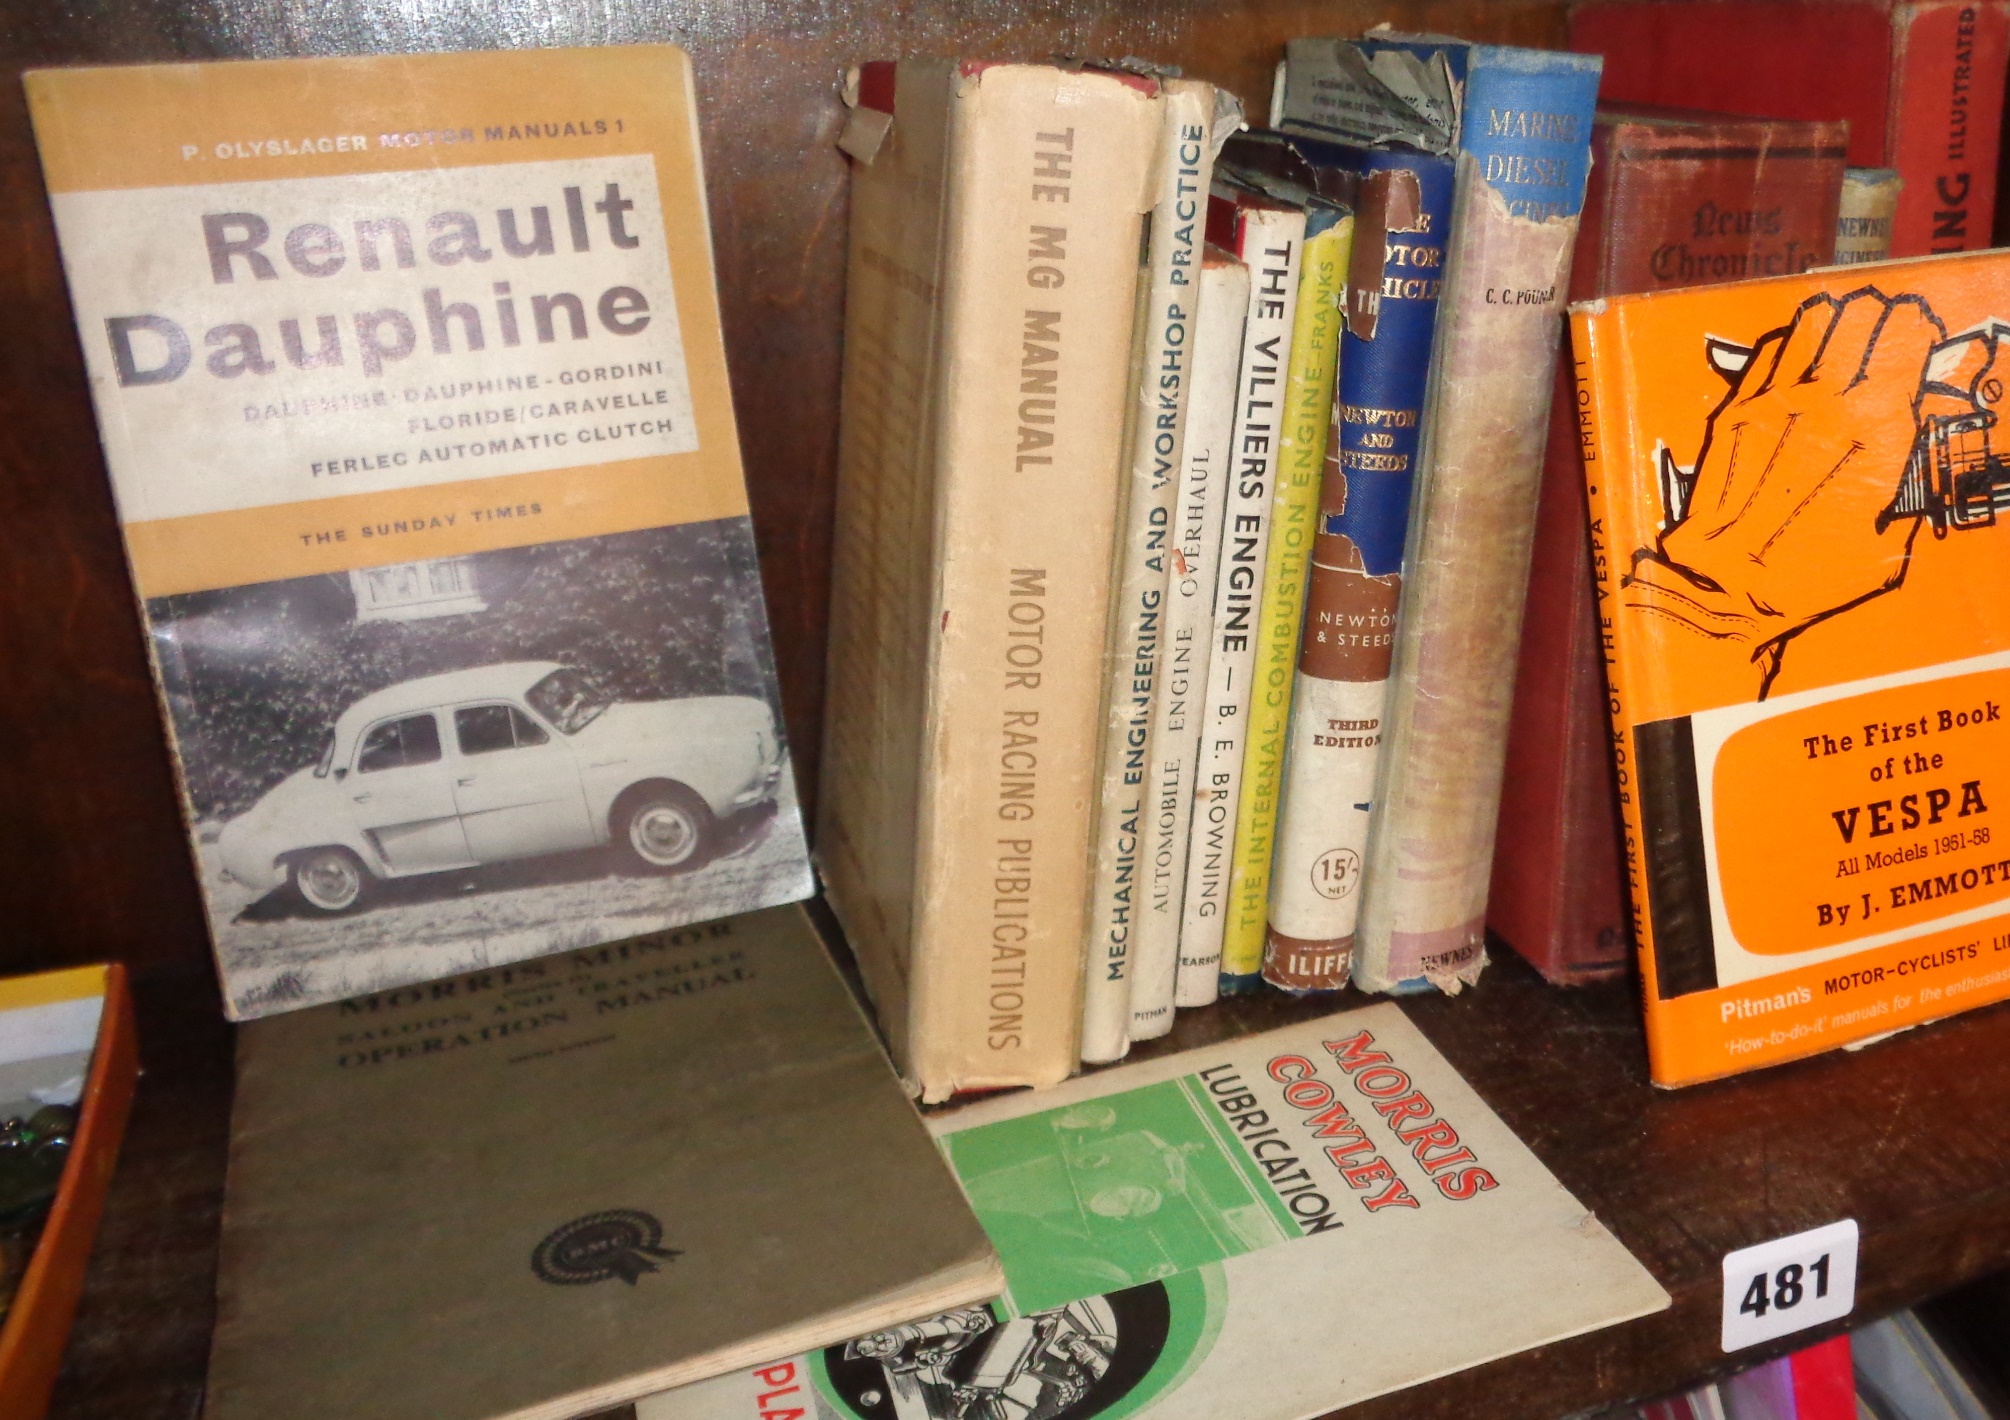 Assorted vintage engineering and classic car/motoring books including Vespa, Morris and Renault